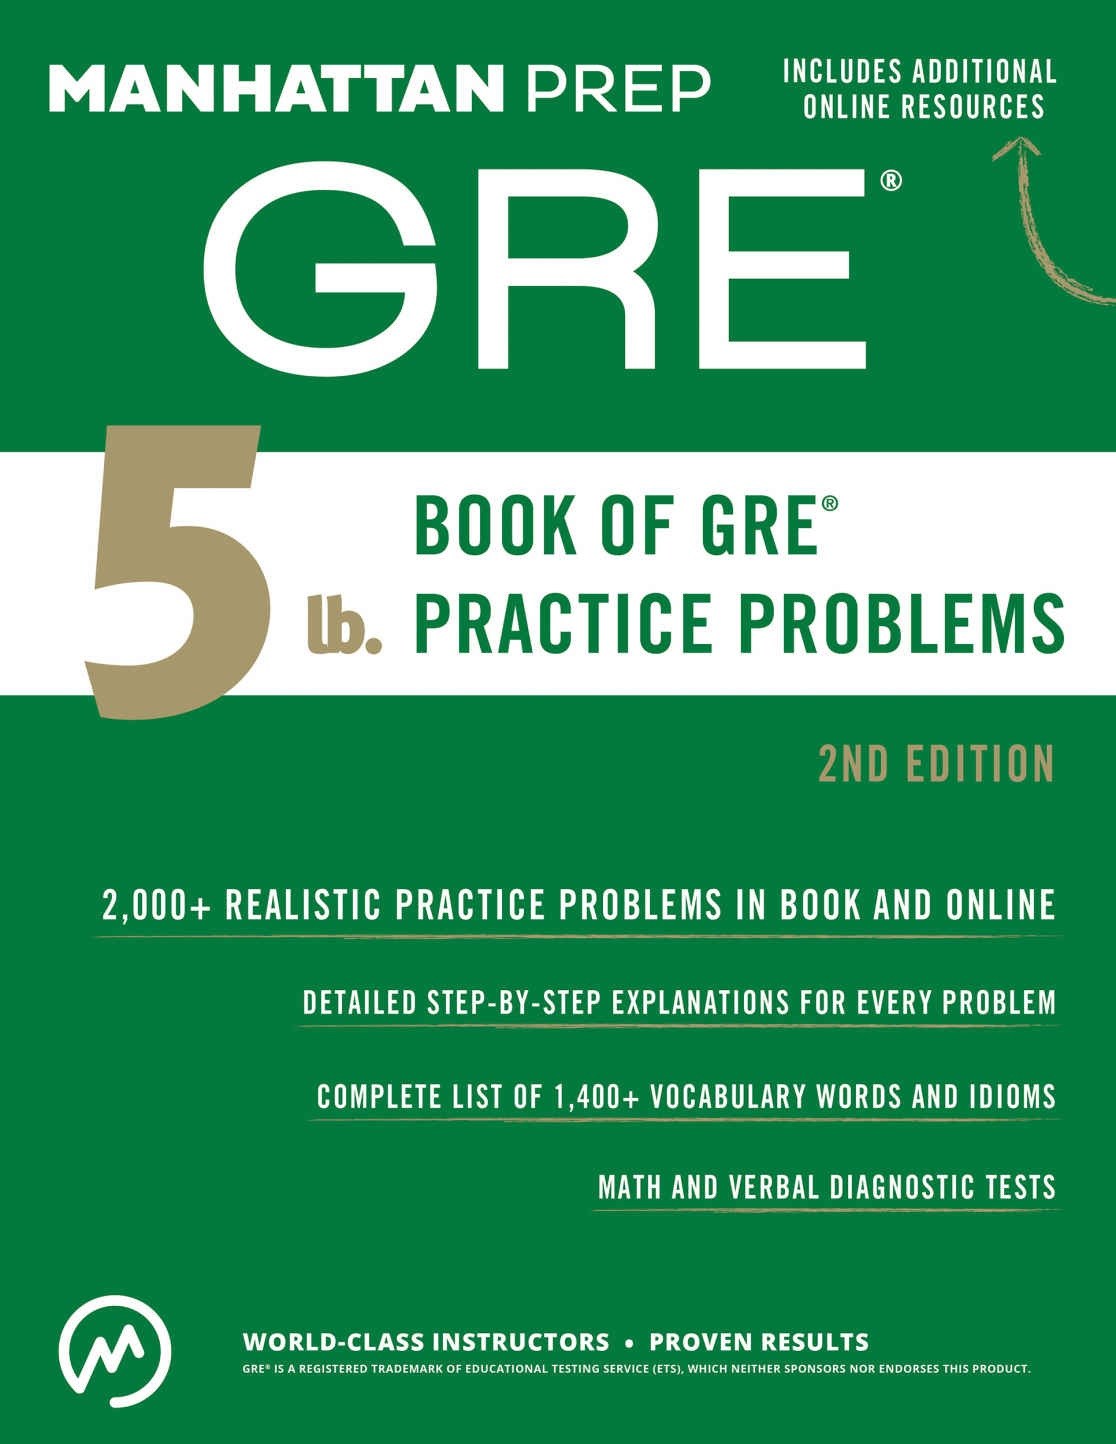 The-5-lb.-Book-of-GRE-Practice-Problems-2nd-Edition-by-Manhattan-Prepgrematerials.com_.jpg